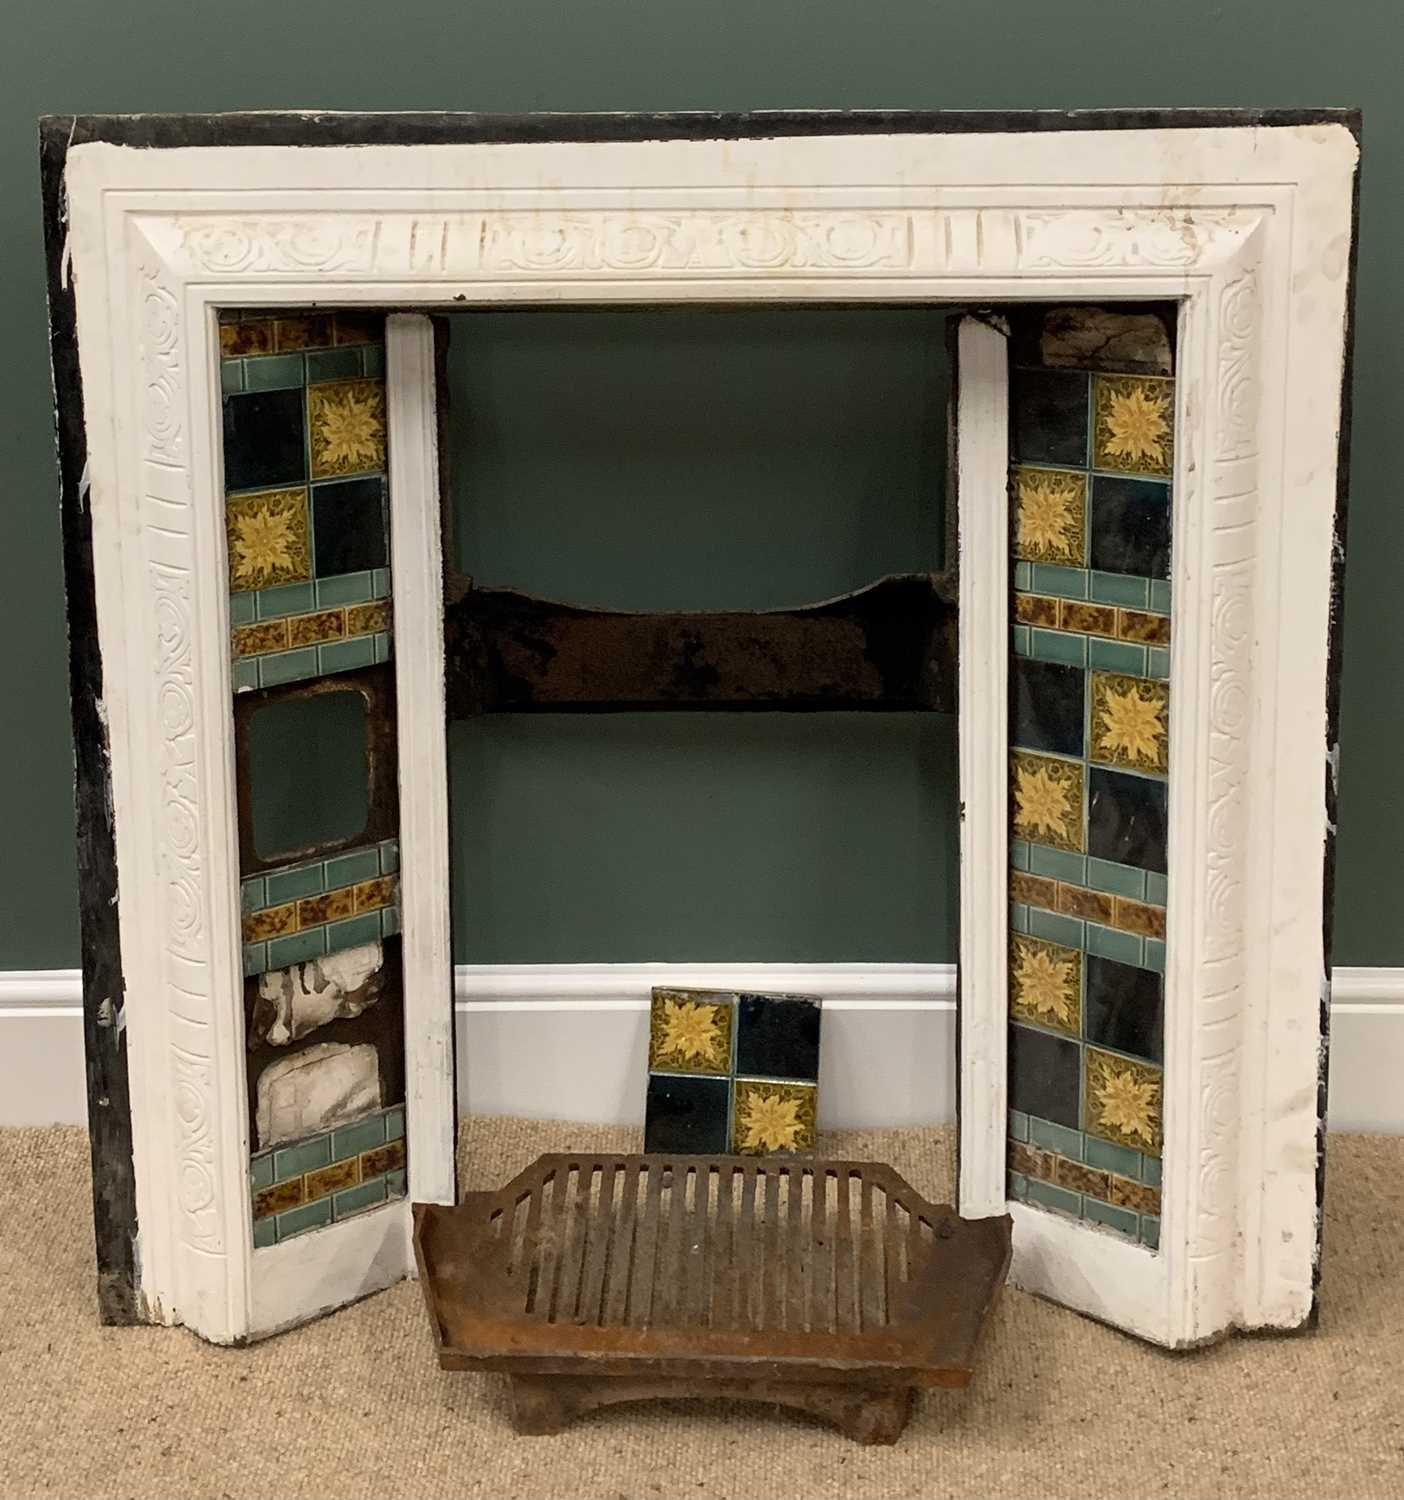 VICTORIAN CAST & TILED FIRE SURROUND with basket and grate, 97cms H, 96cms W, 20cms D